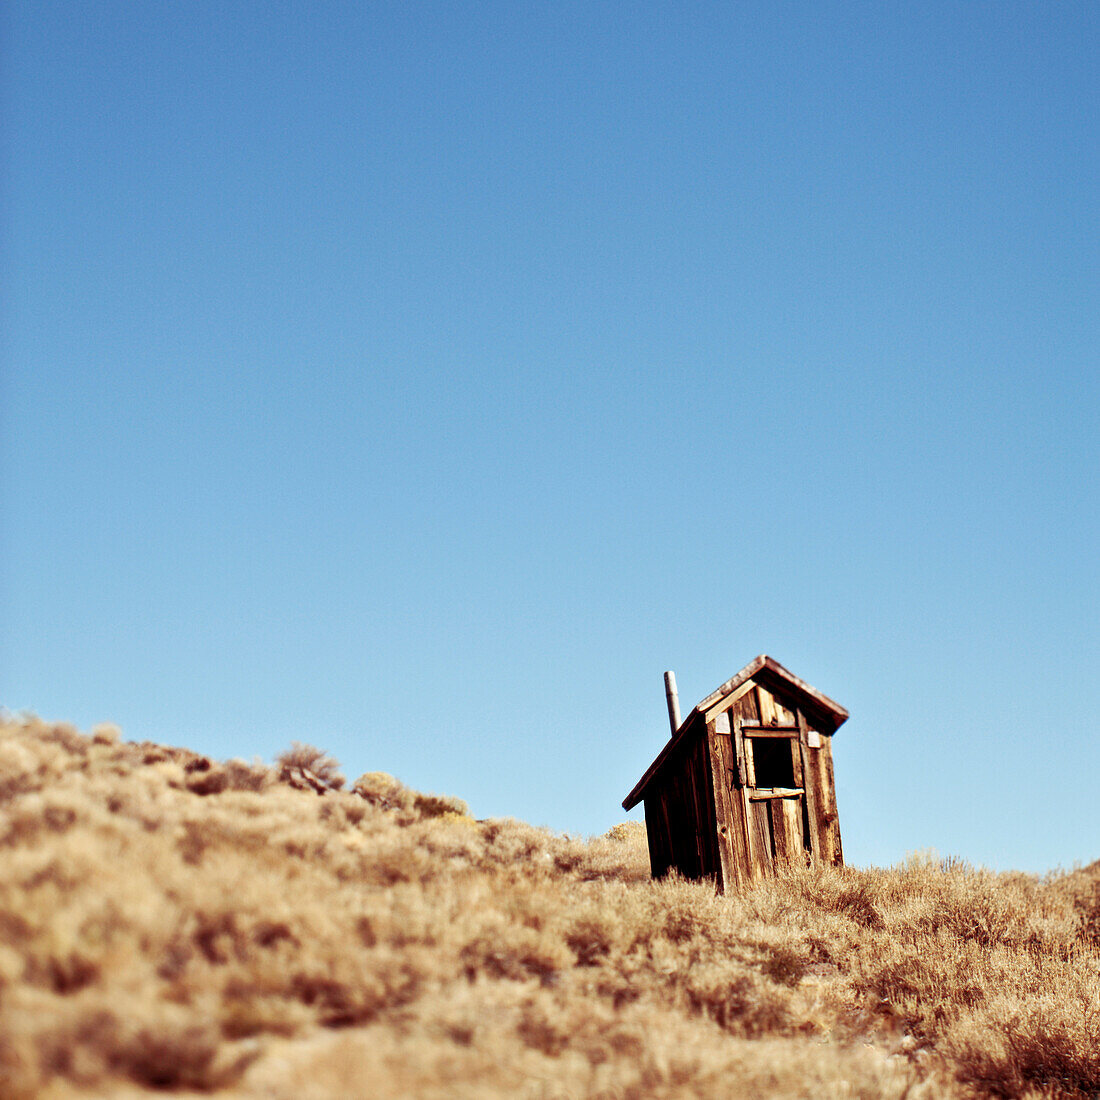 Dilapidated Outhouse on Hillside, Bodie, California, USA